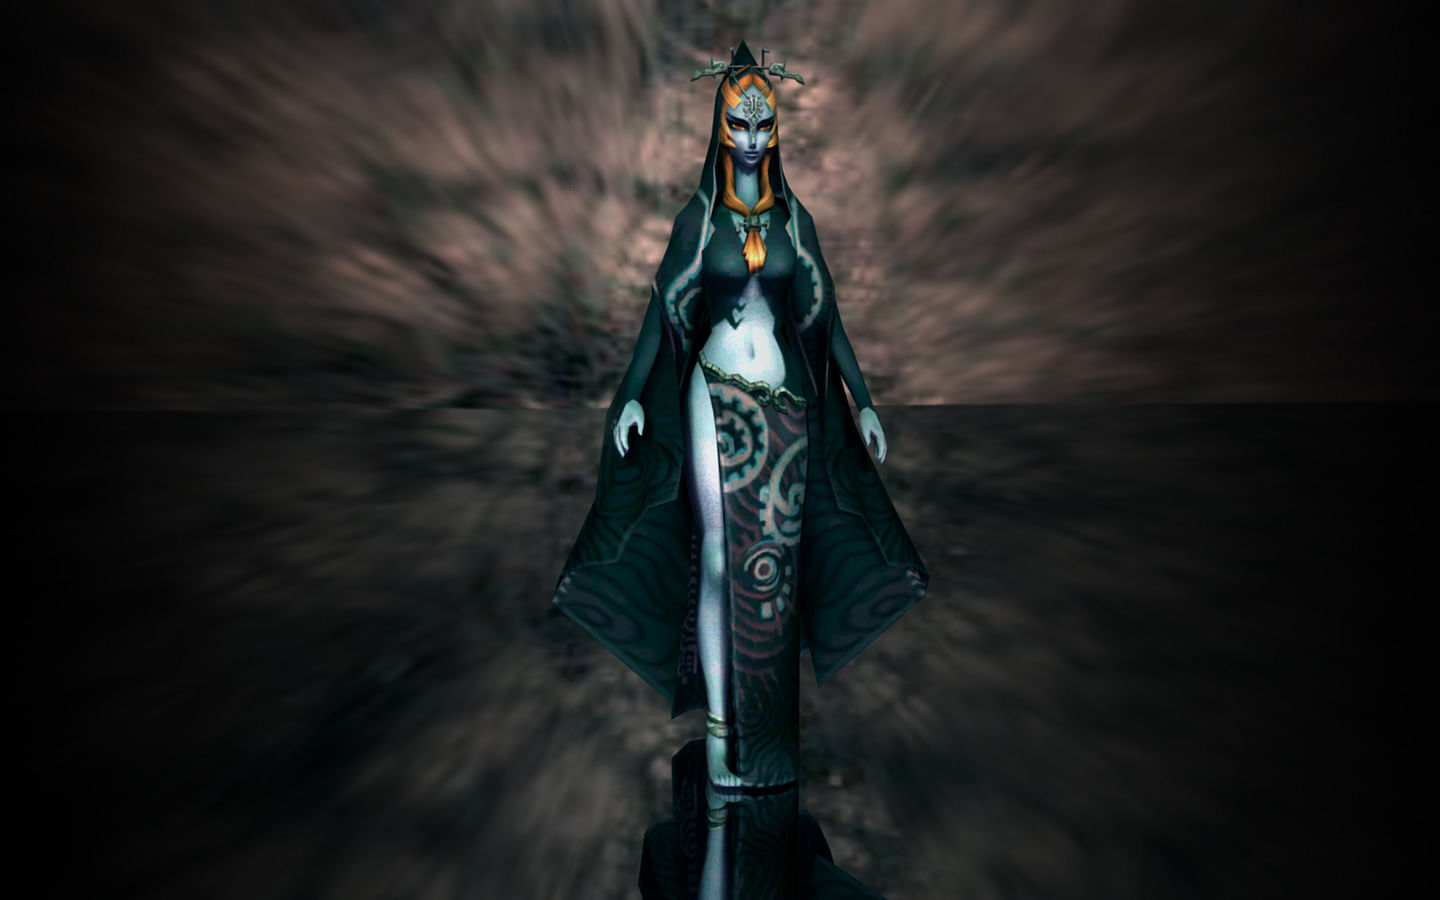 Twili Midna will be playable from now on Nearly three months since the rele...